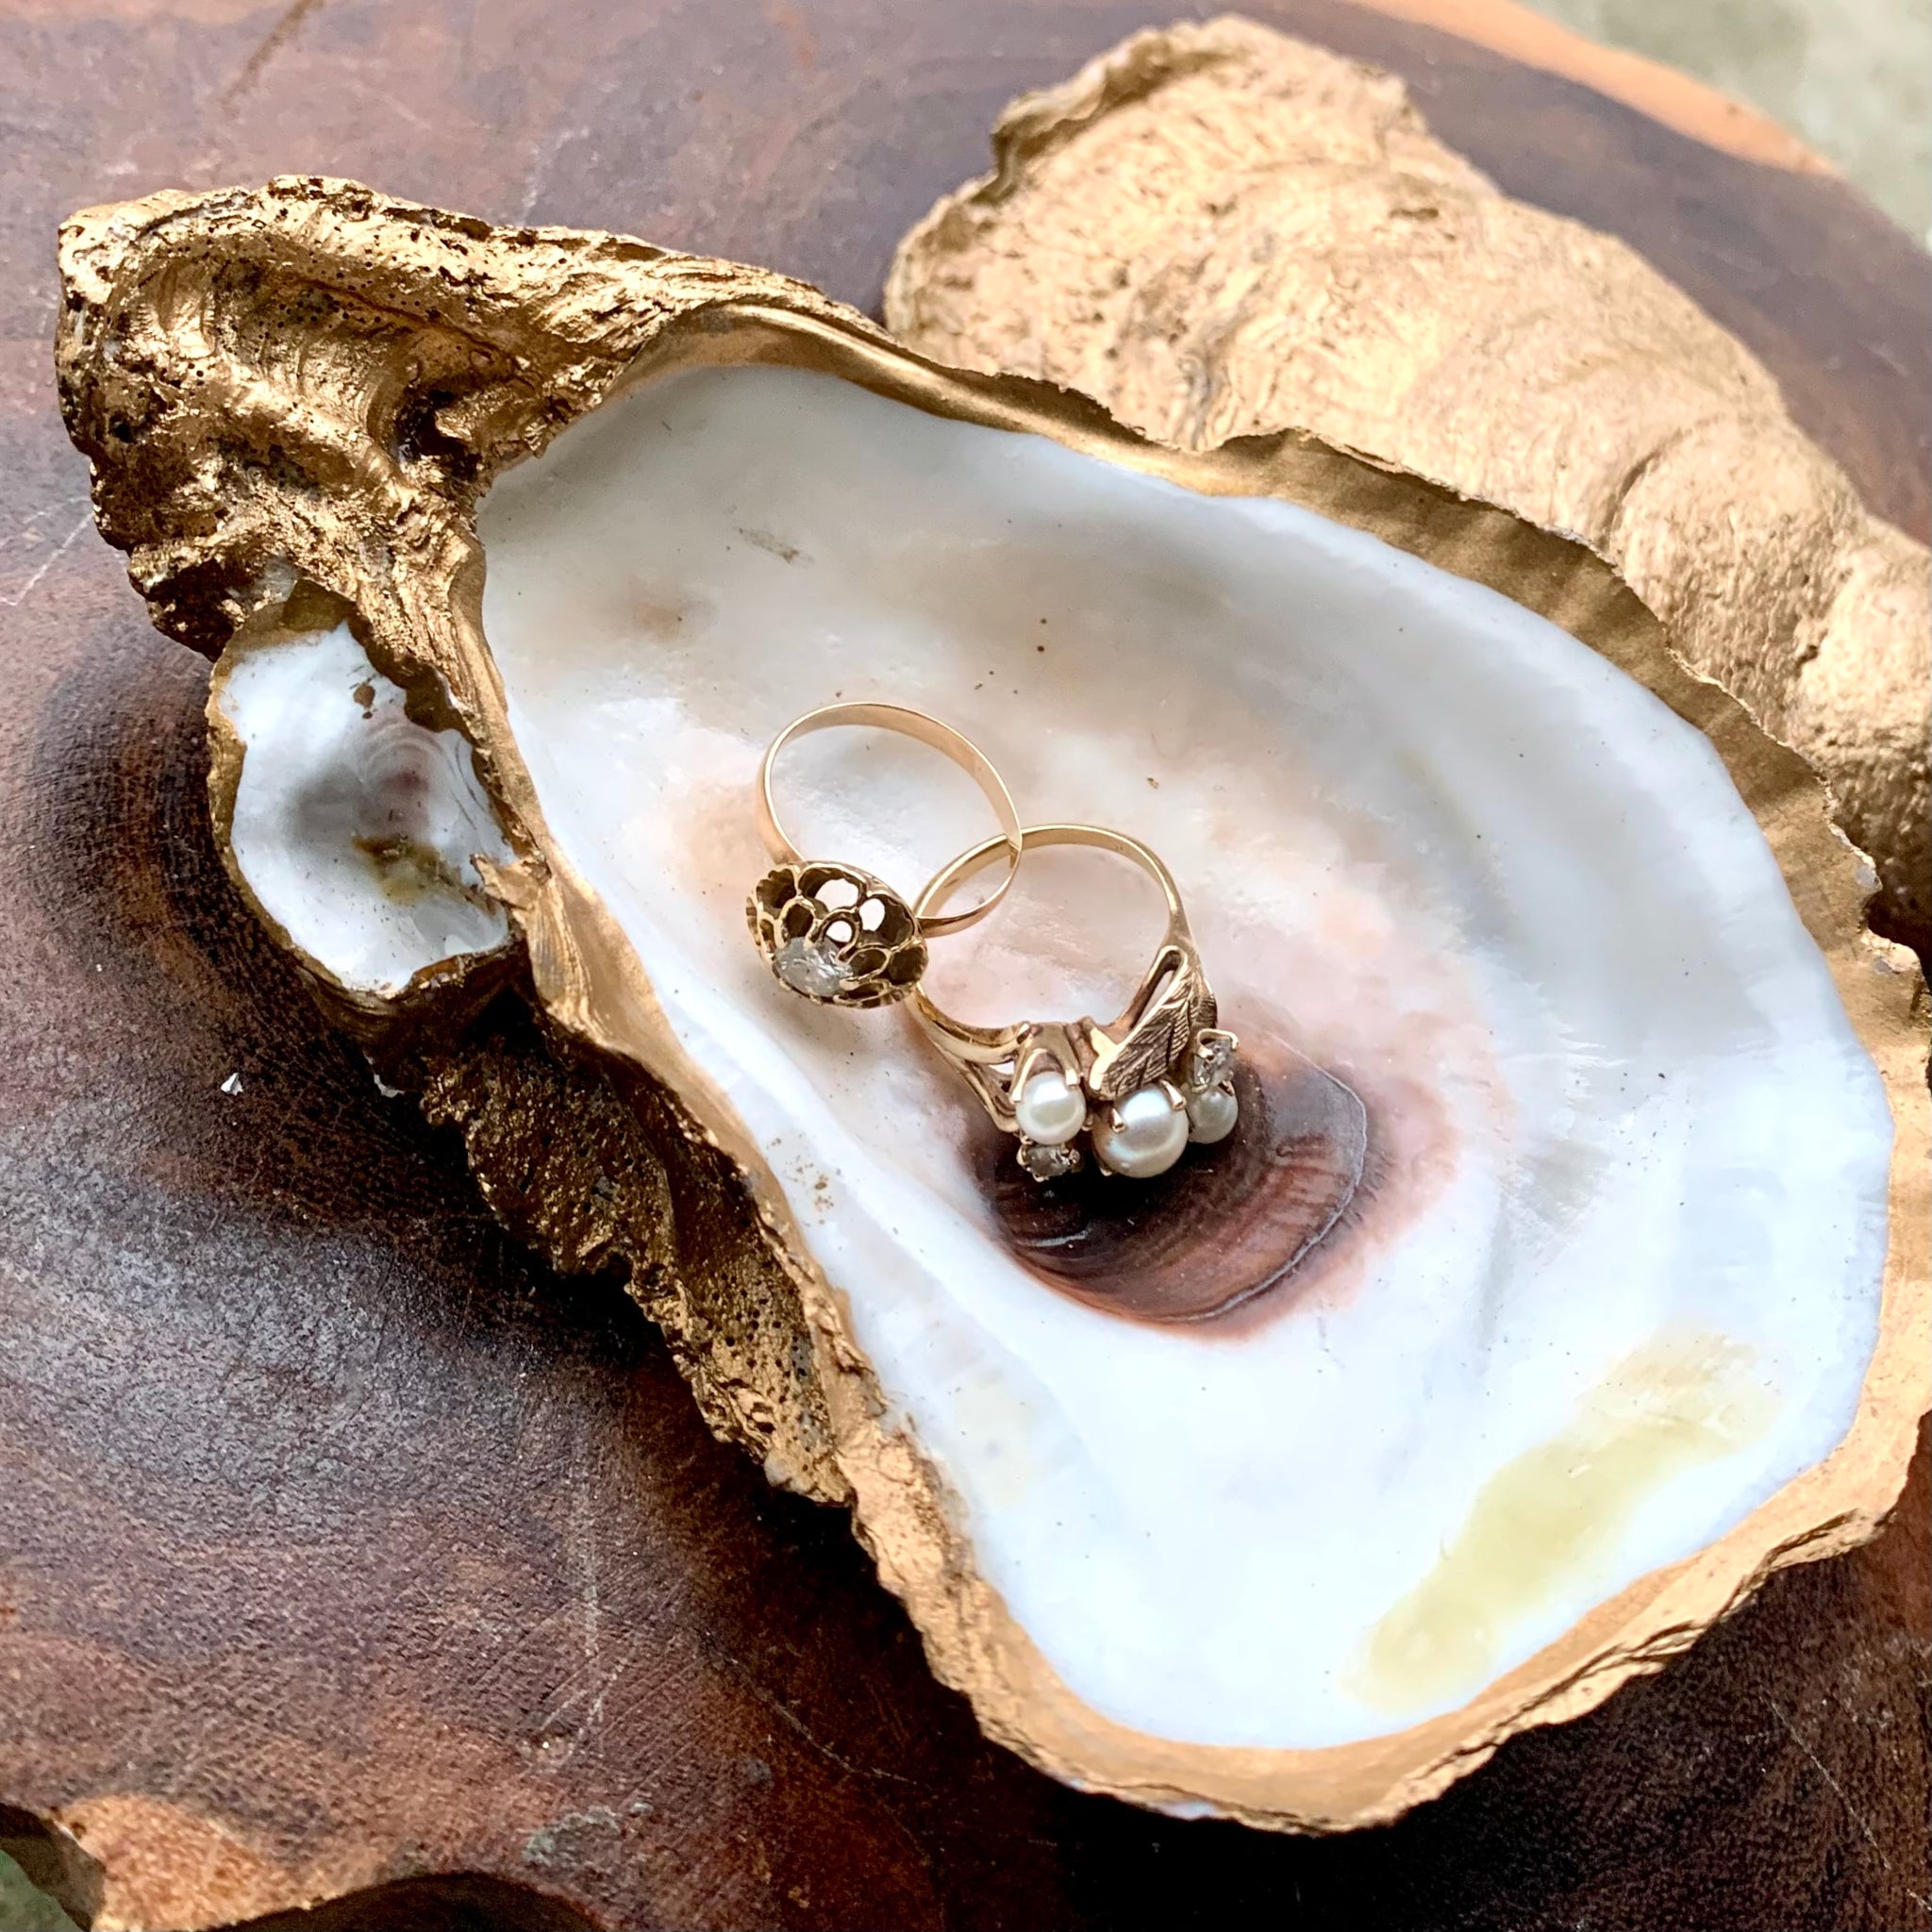 This oyster shell ring dish fatures beautiful recycled oyster shells from the gulf of mexico hand painted with metallic gold on the edges and back and covered in a a clear coat for shine and to highlight the pearly white color of the oyster shell. 